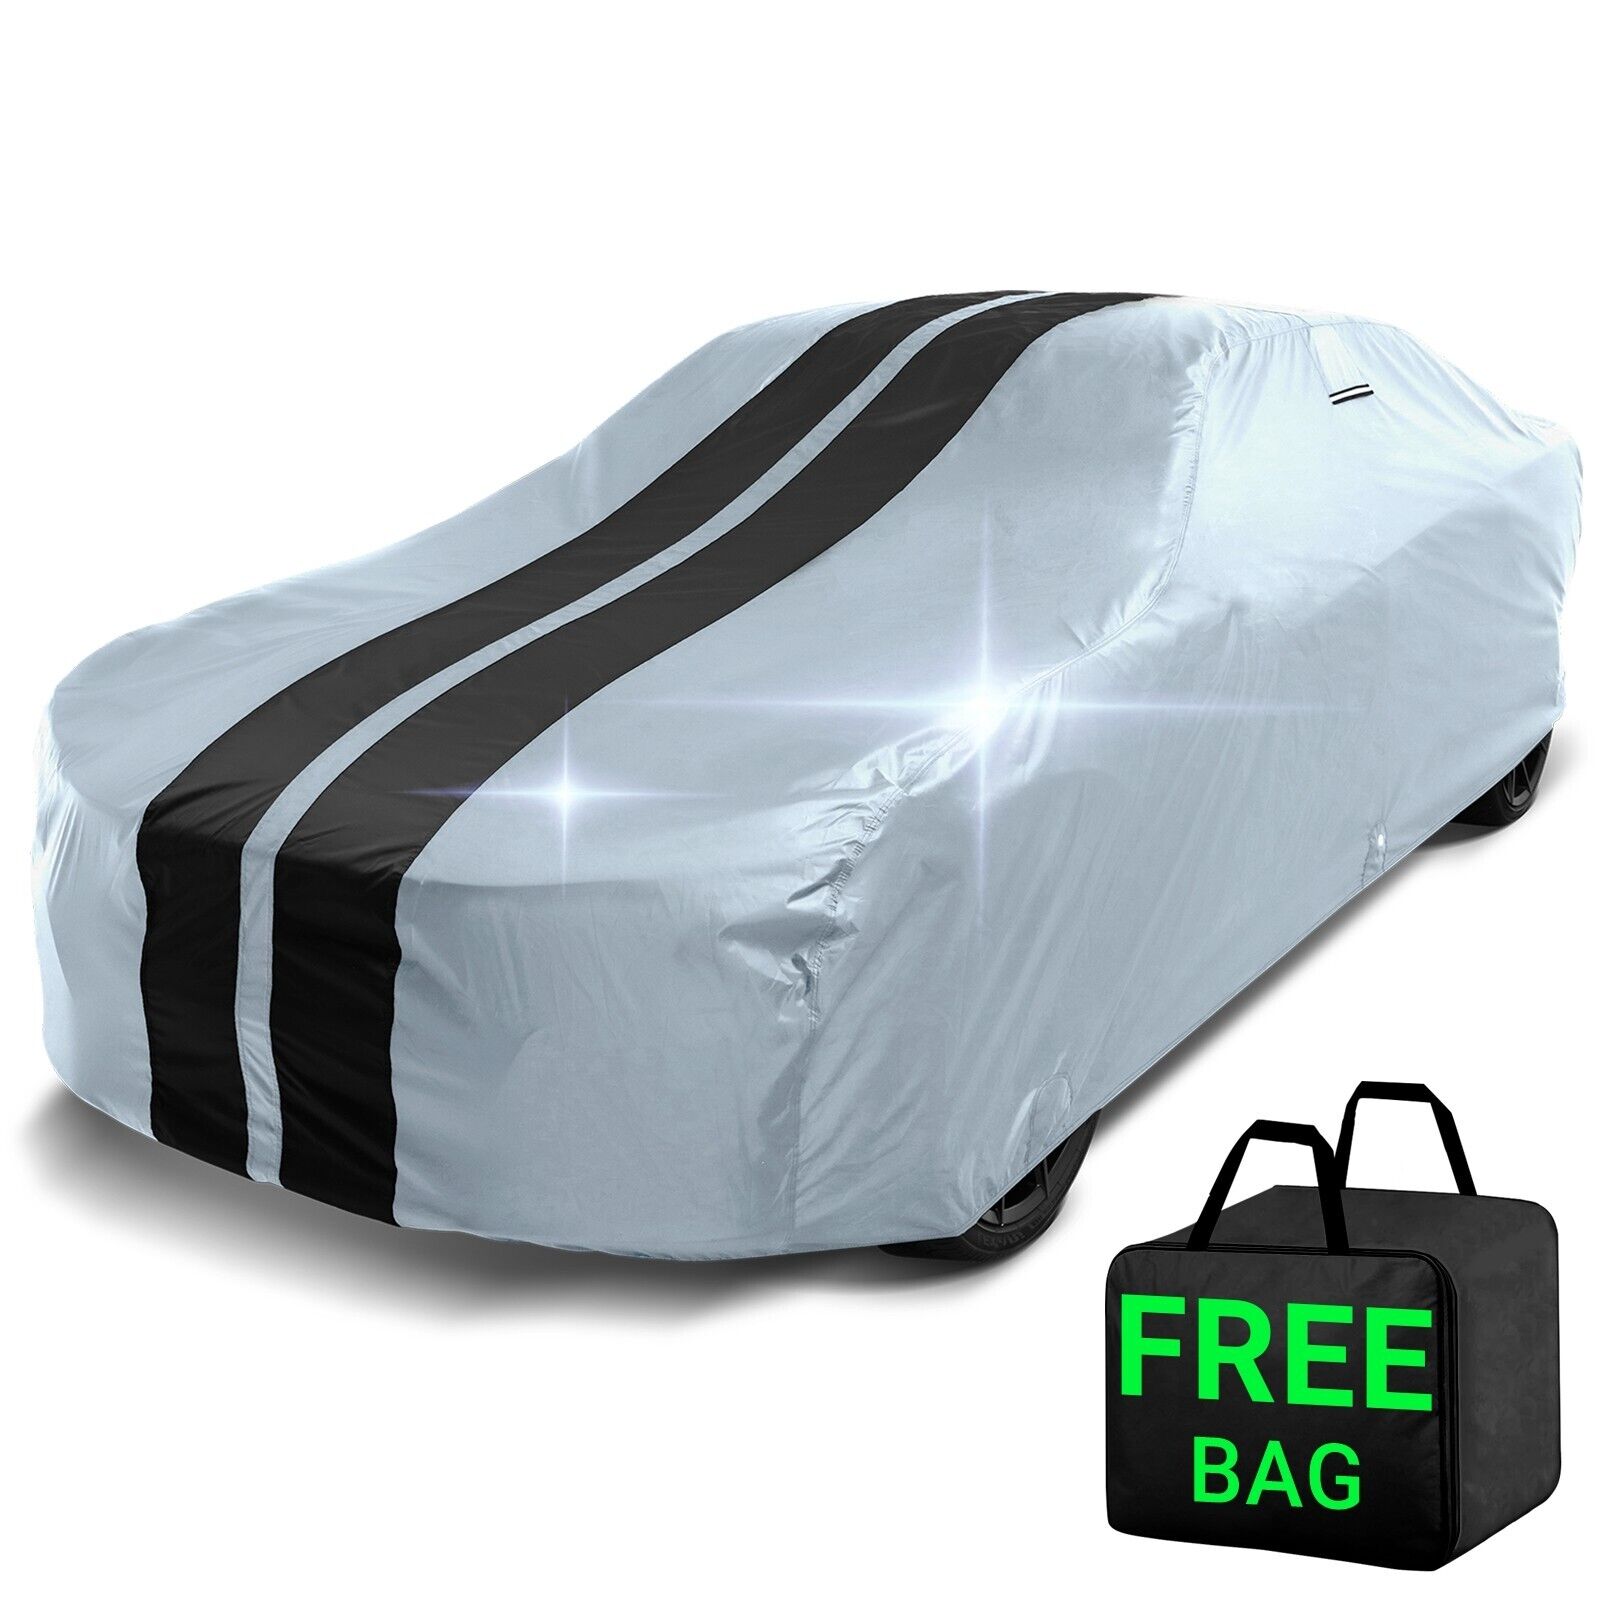 1959-1965 BMW 700 Custom Car Cover - All-Weather Waterproof Outdoor Protection